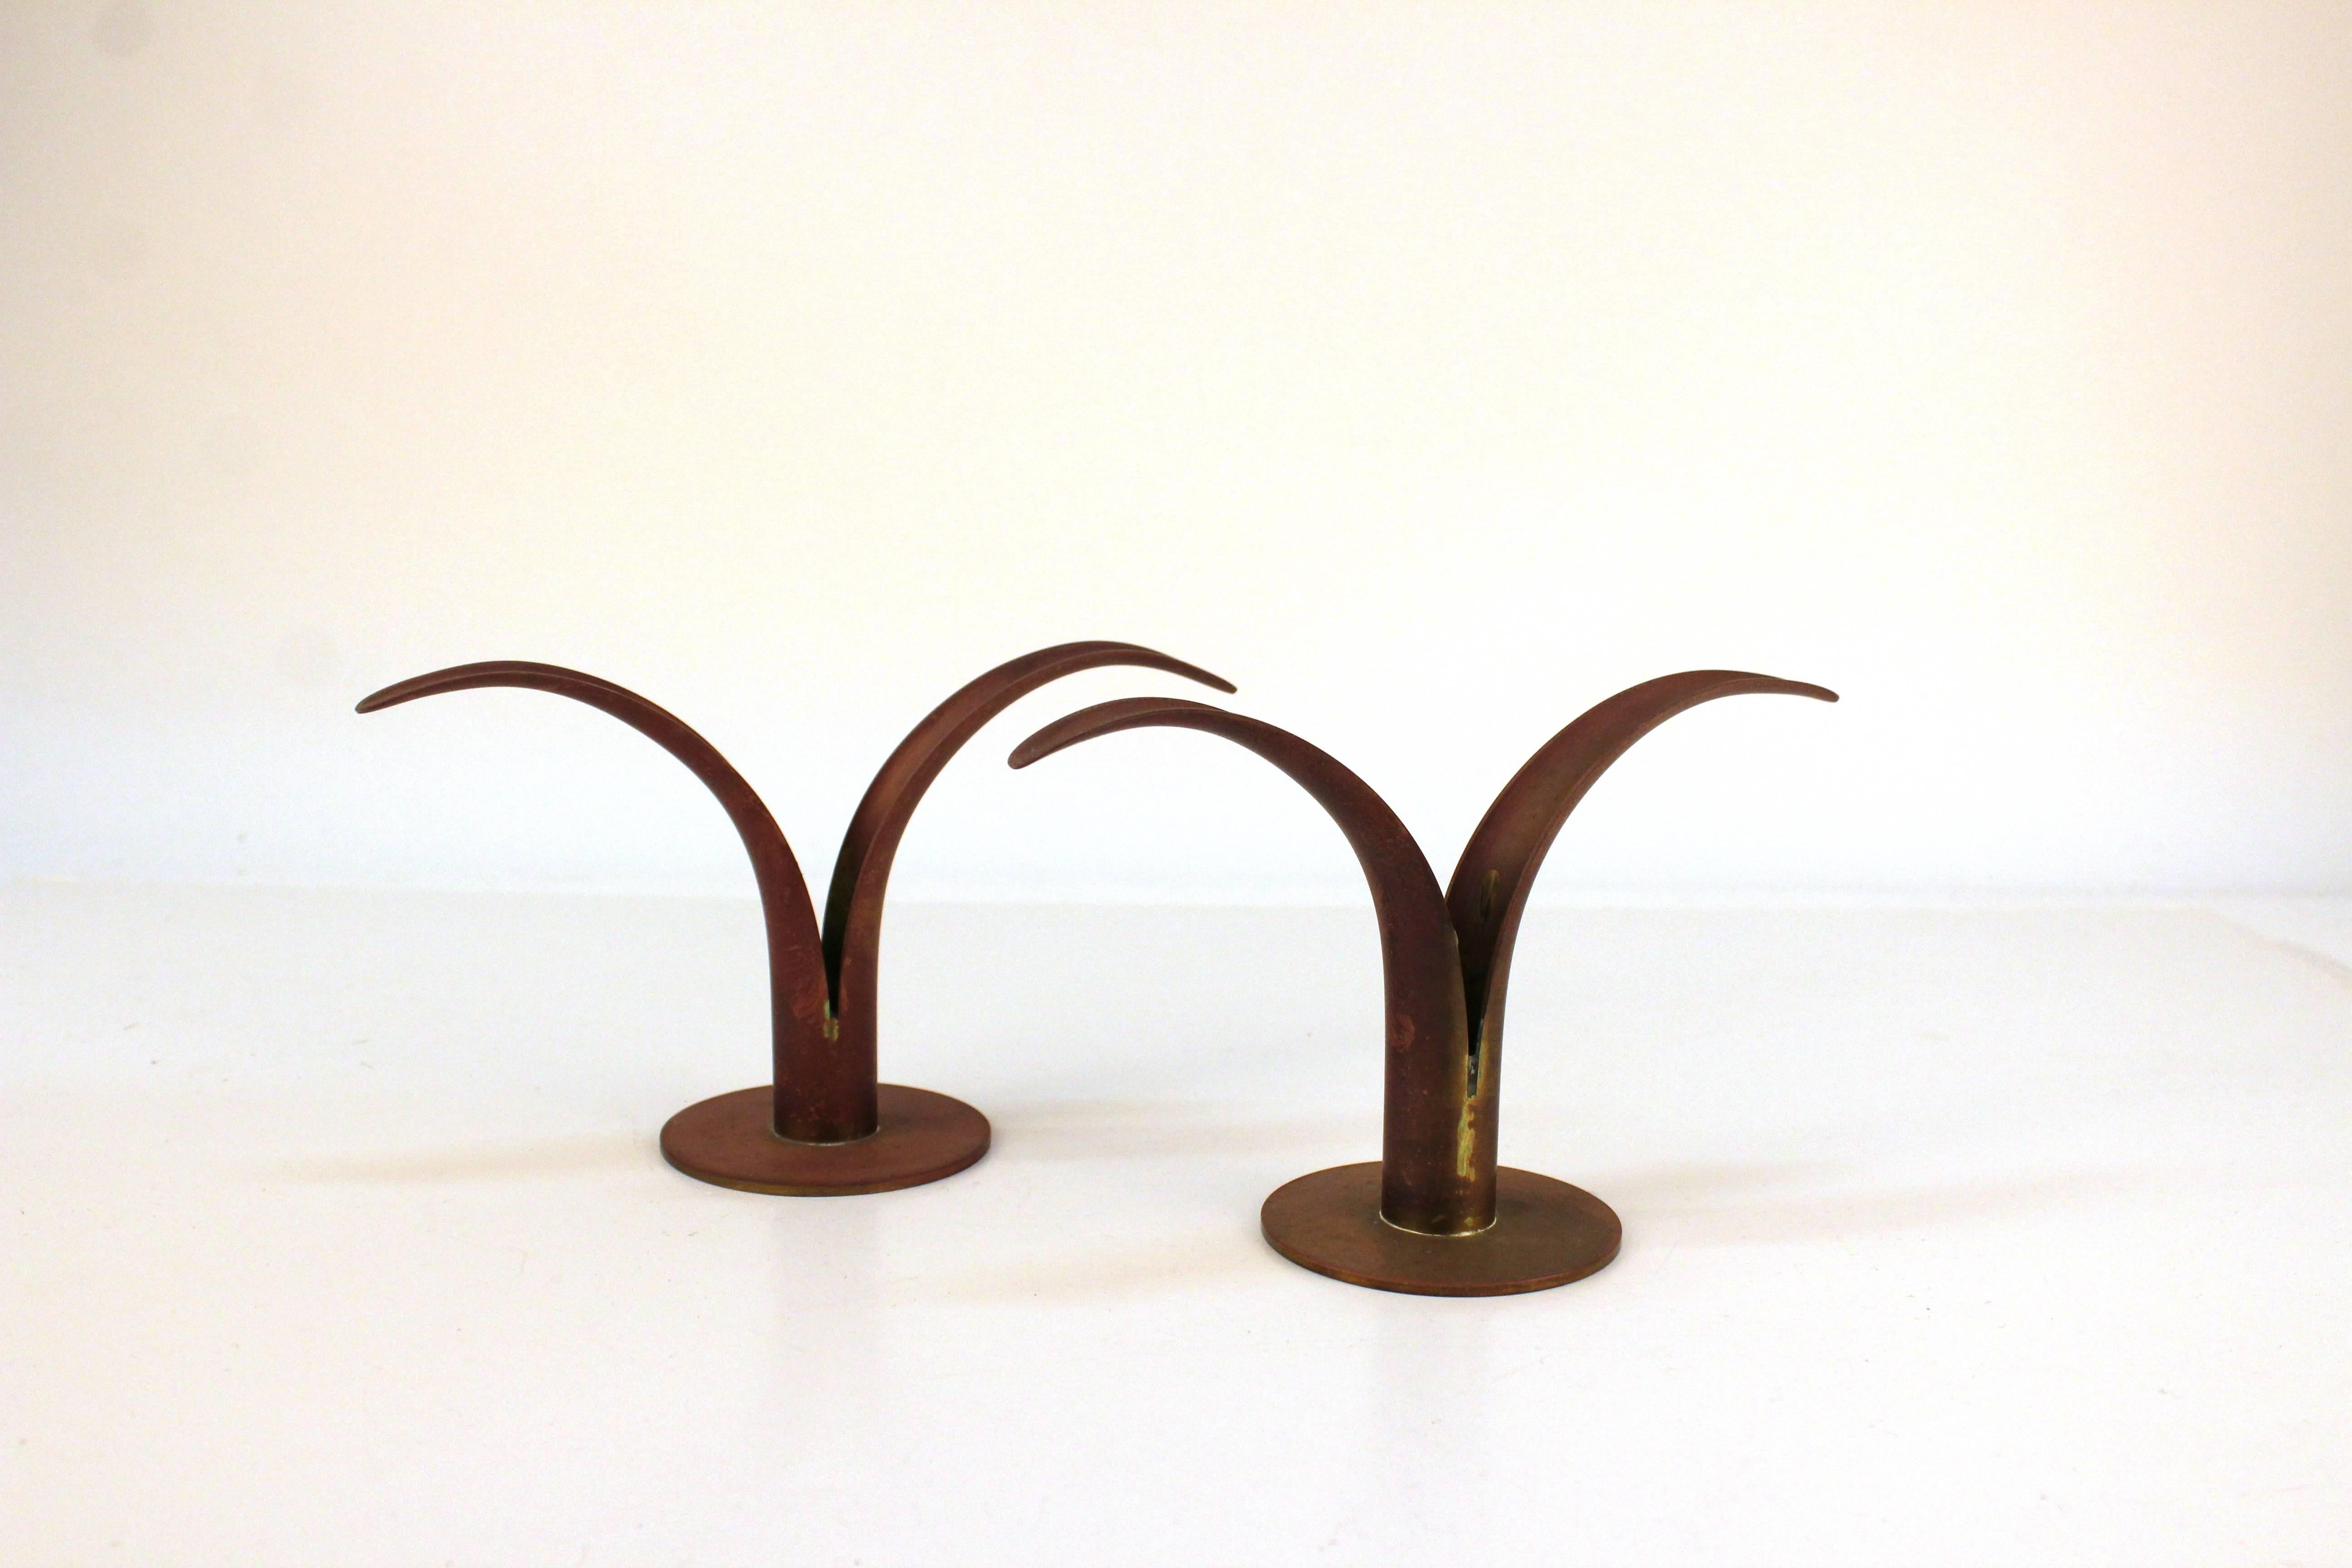 Pair of Scandinavian Ystad-Metall candlesticks in patinated brass. Despite some appropriate wear due to age and use the candlesticks remain in overall good vintage condition. A second pair is available for purchase.

110620

 